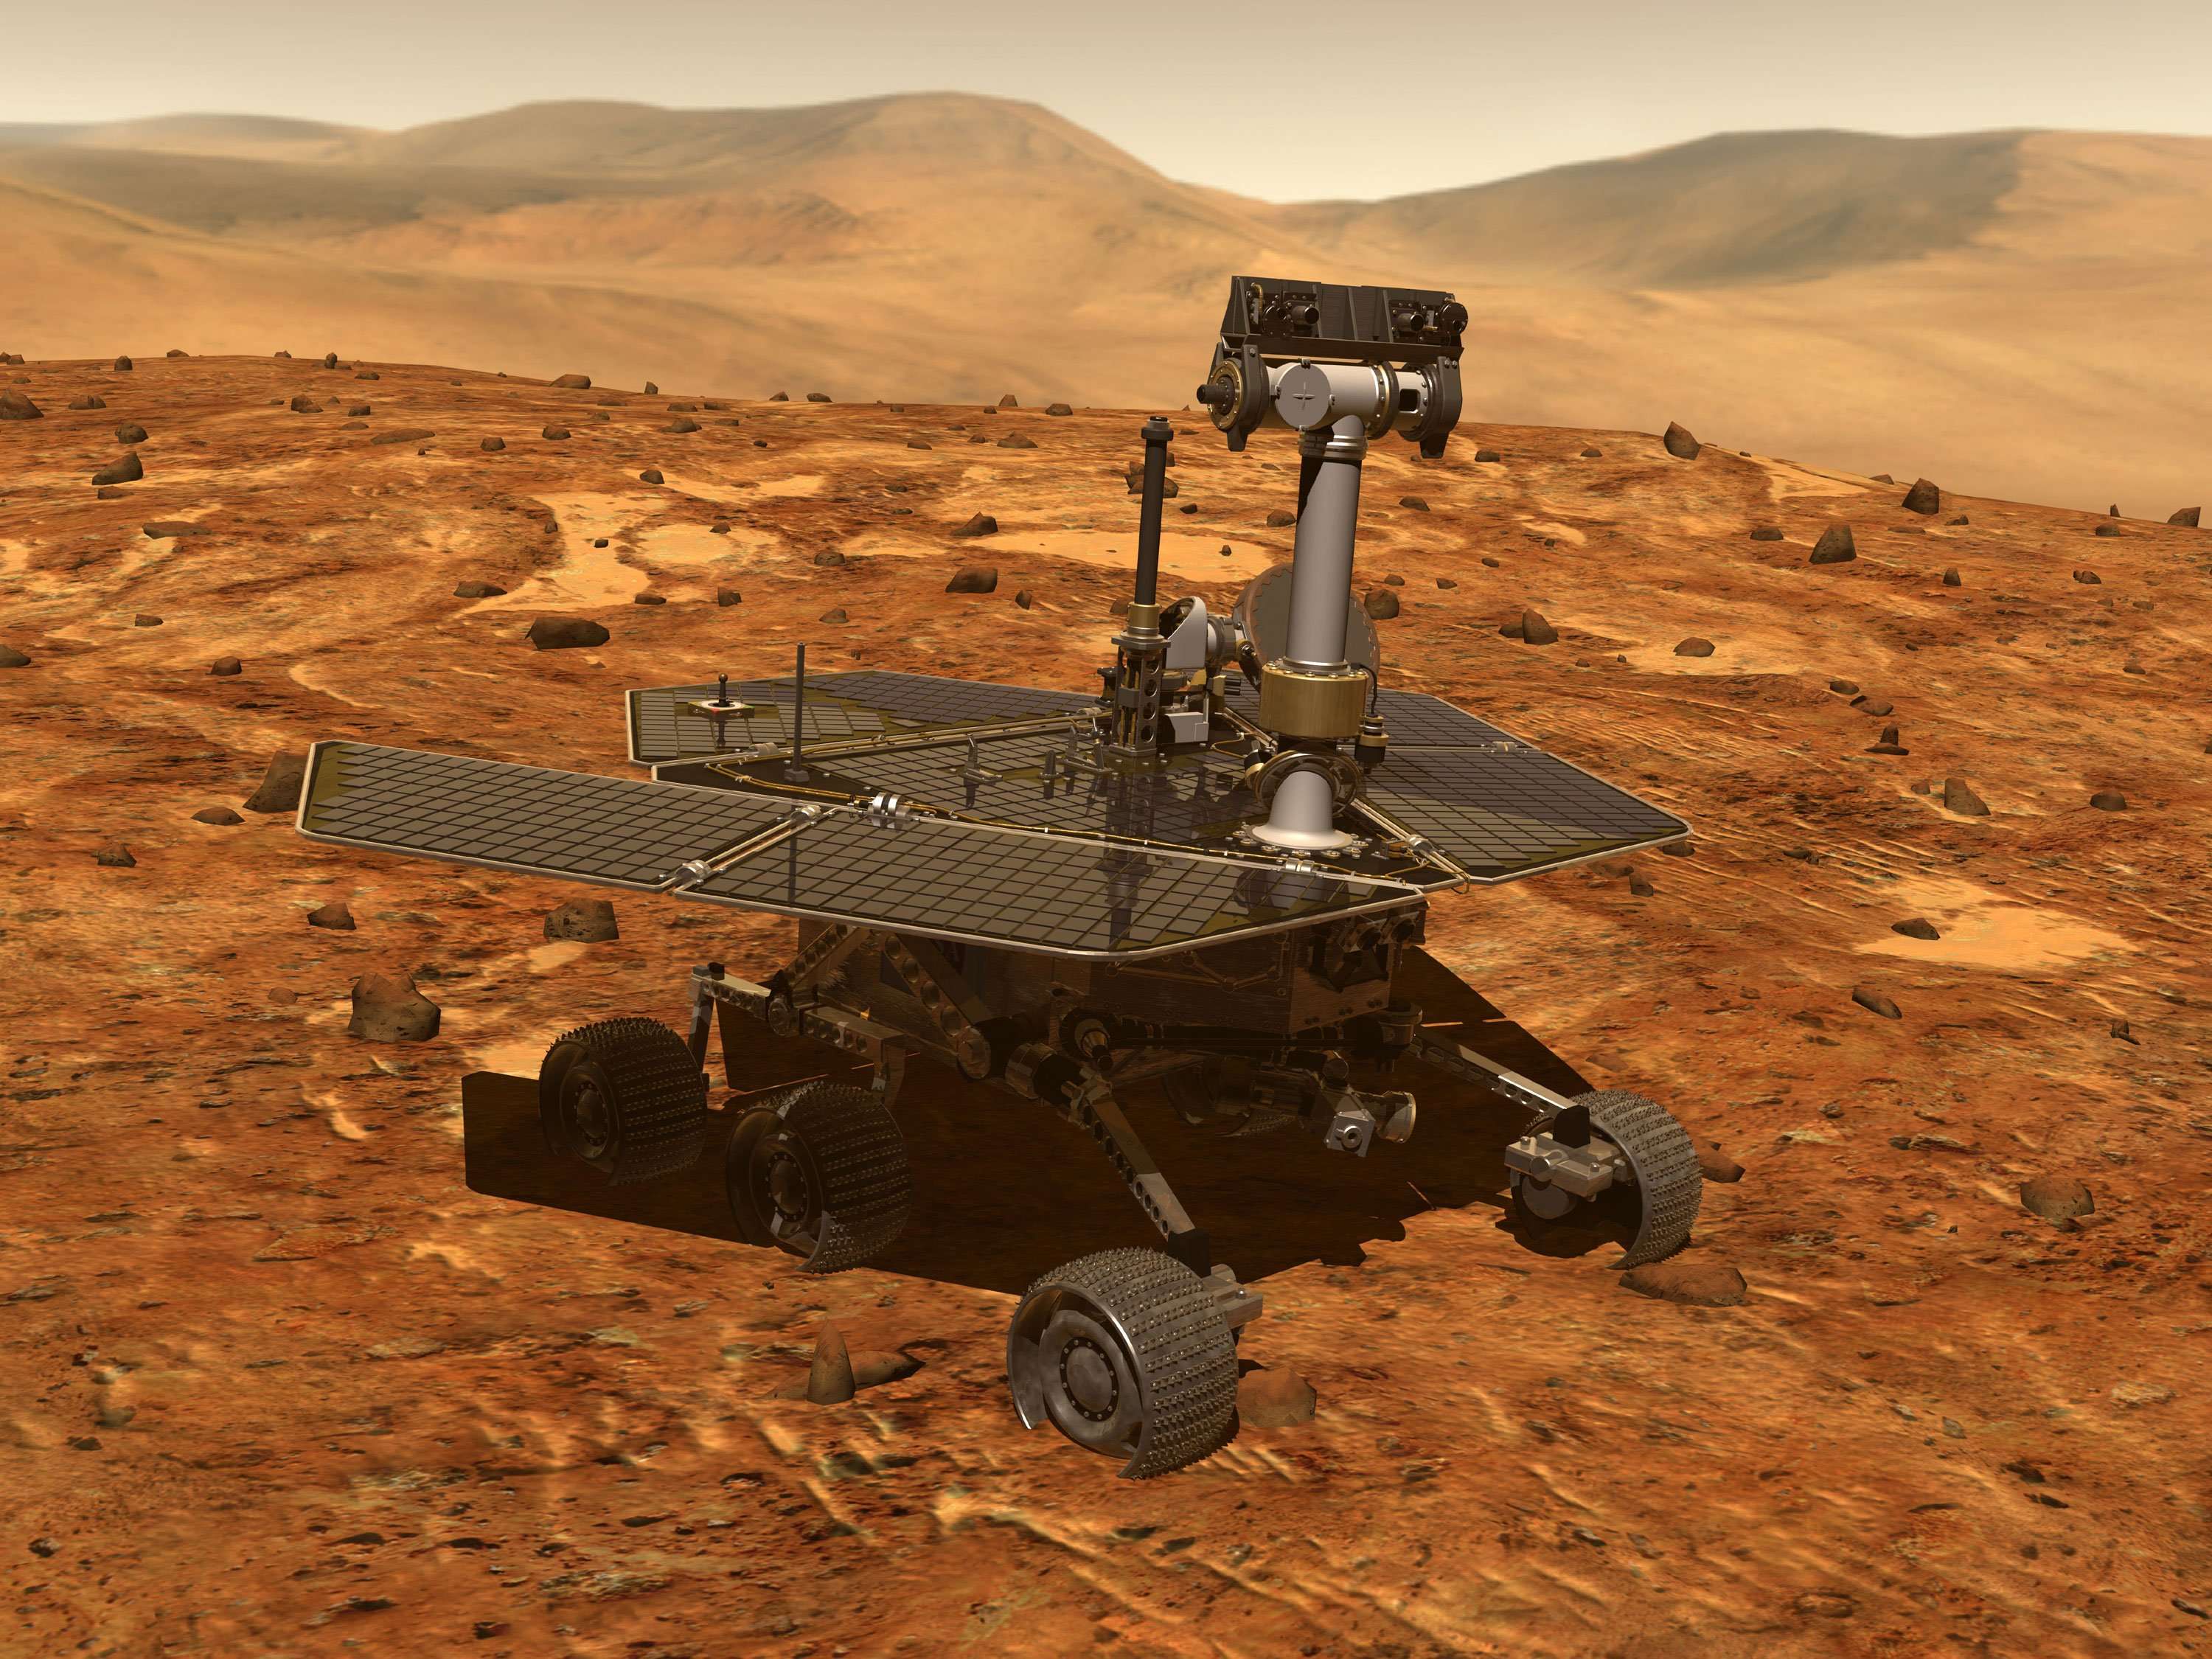 image for Will we hear from Opportunity soon?